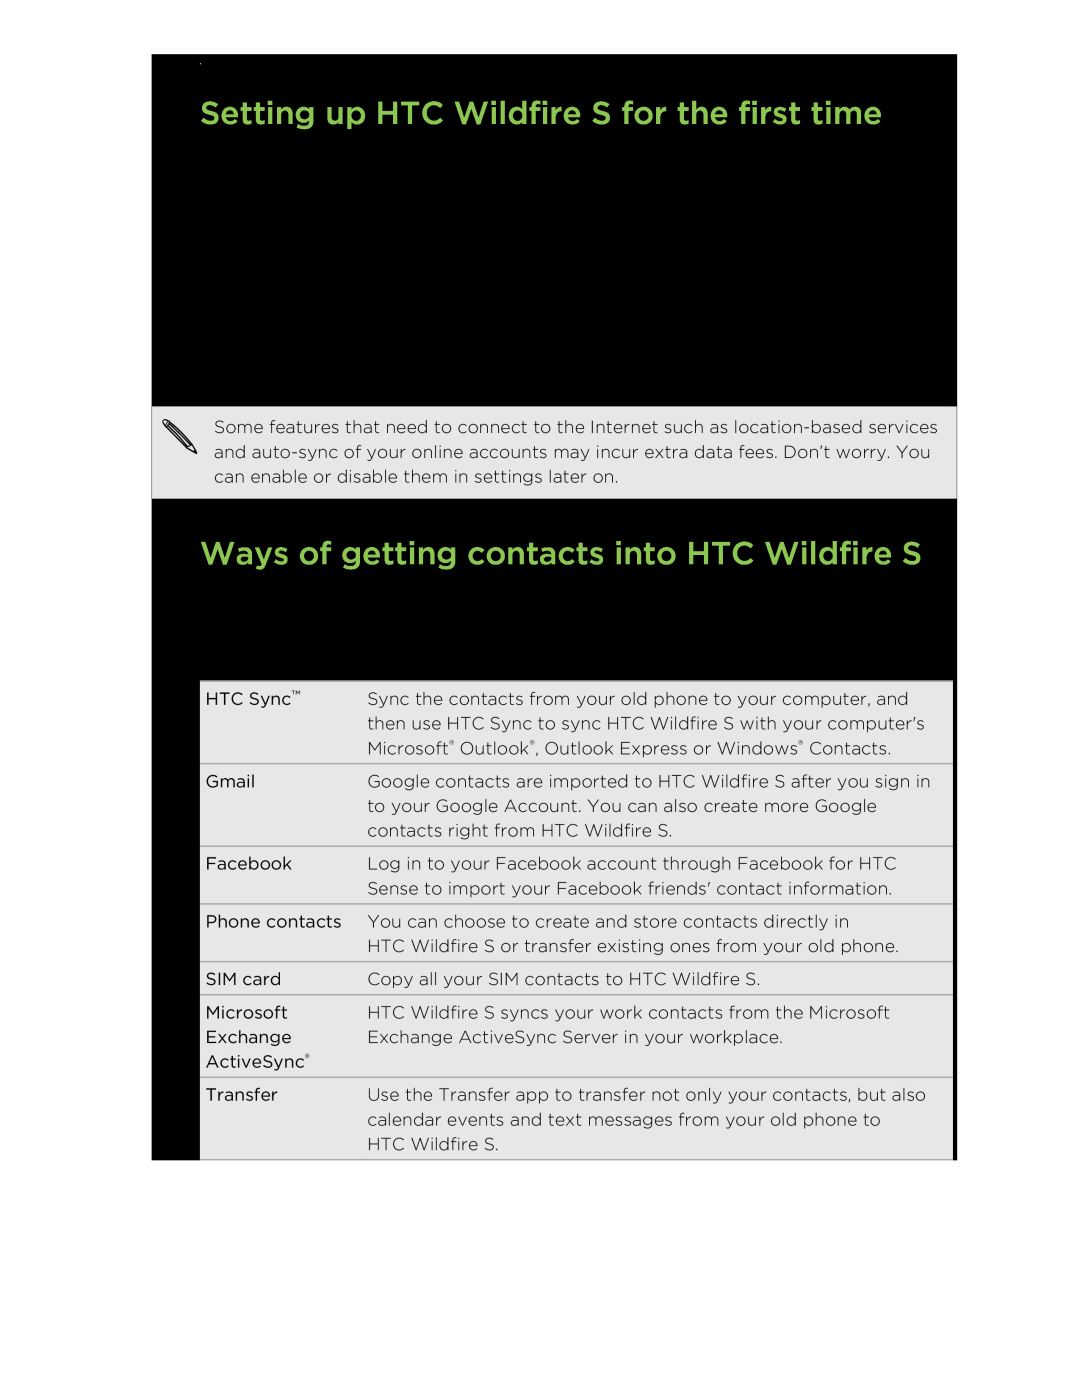 HTC manual Setting up HTC Wildfire S for the first time, Ways of getting contacts into HTC Wildfire S 